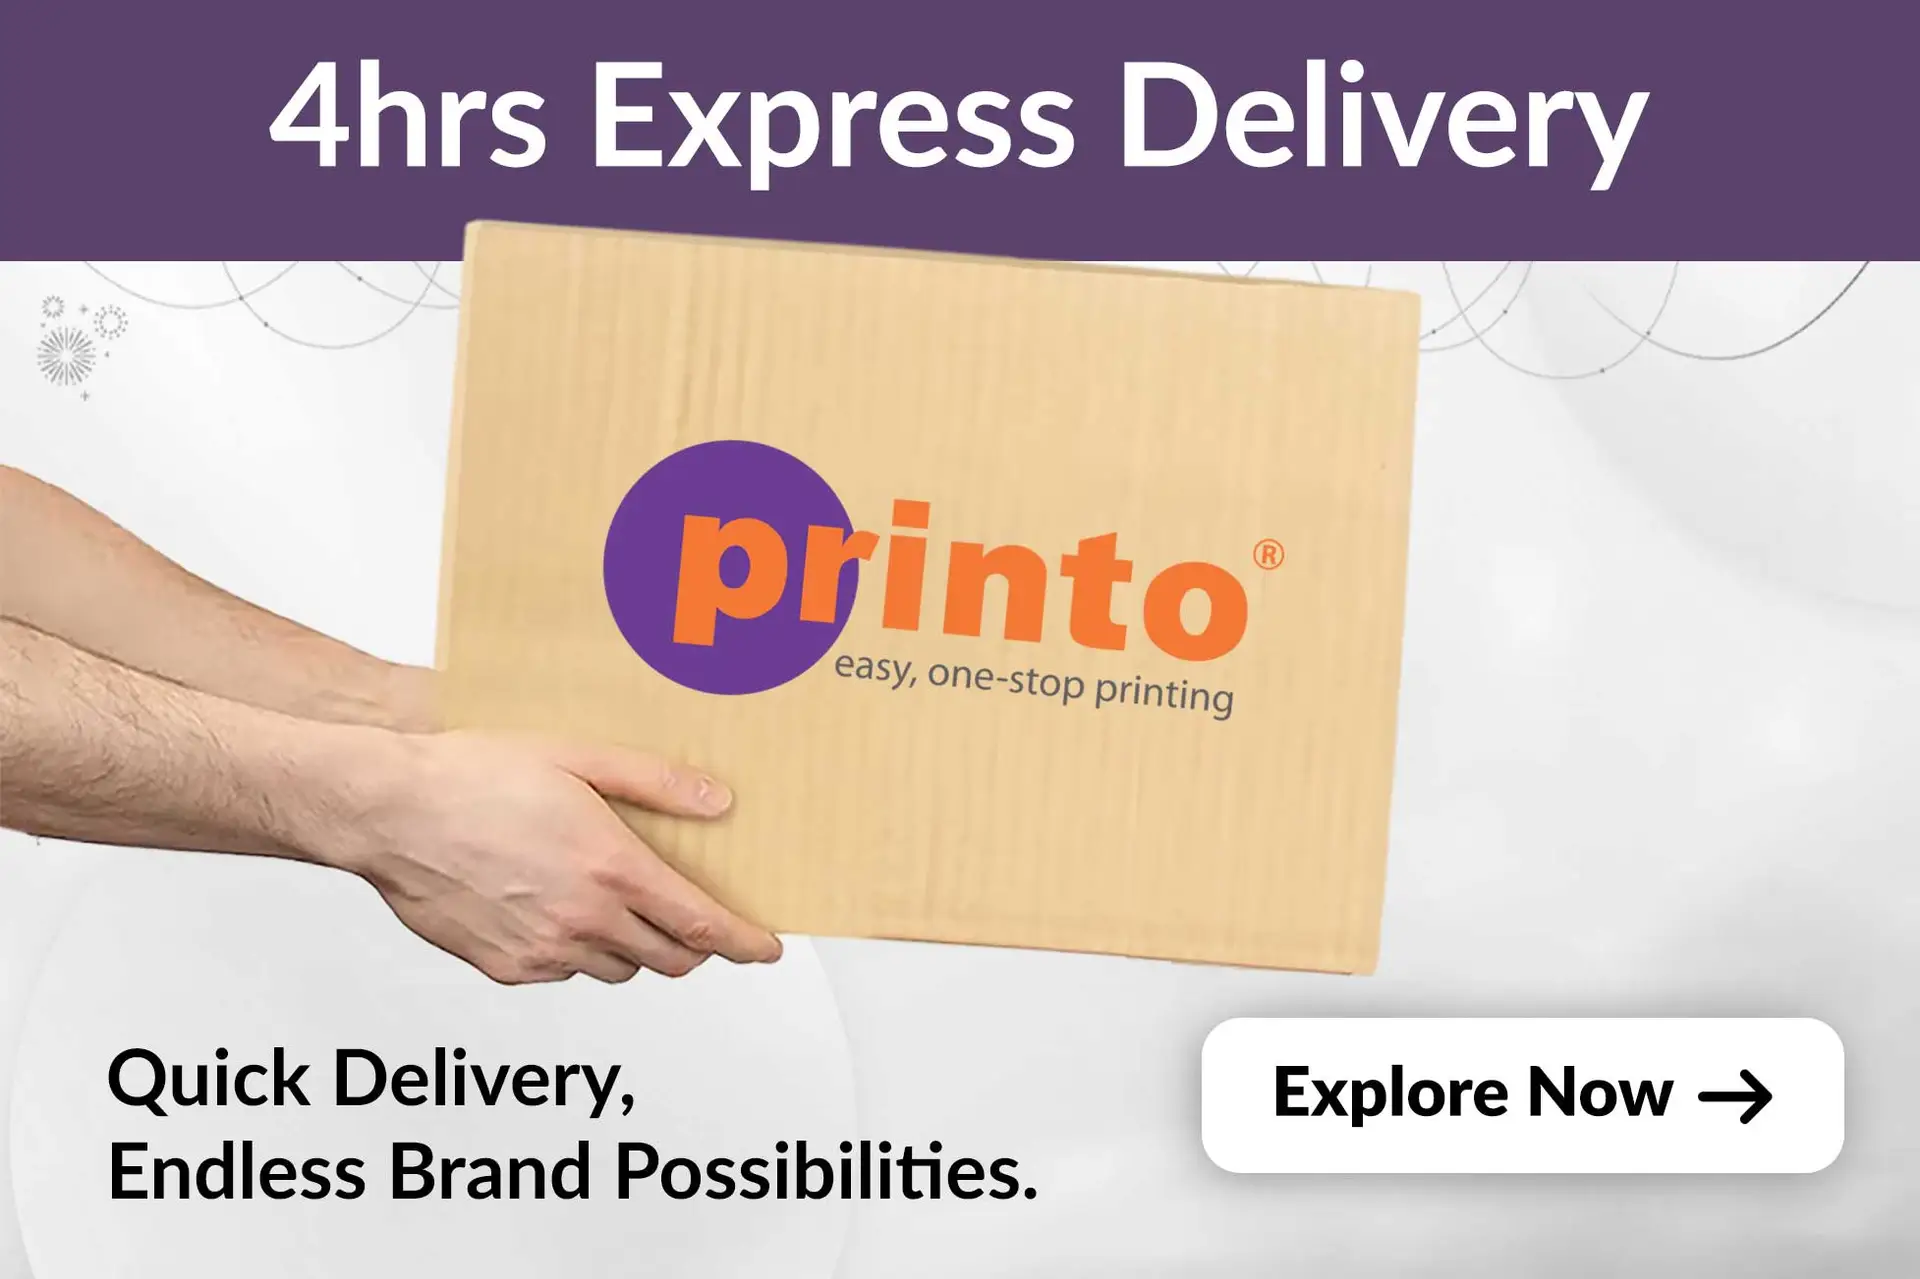 4hrs Express Delivery